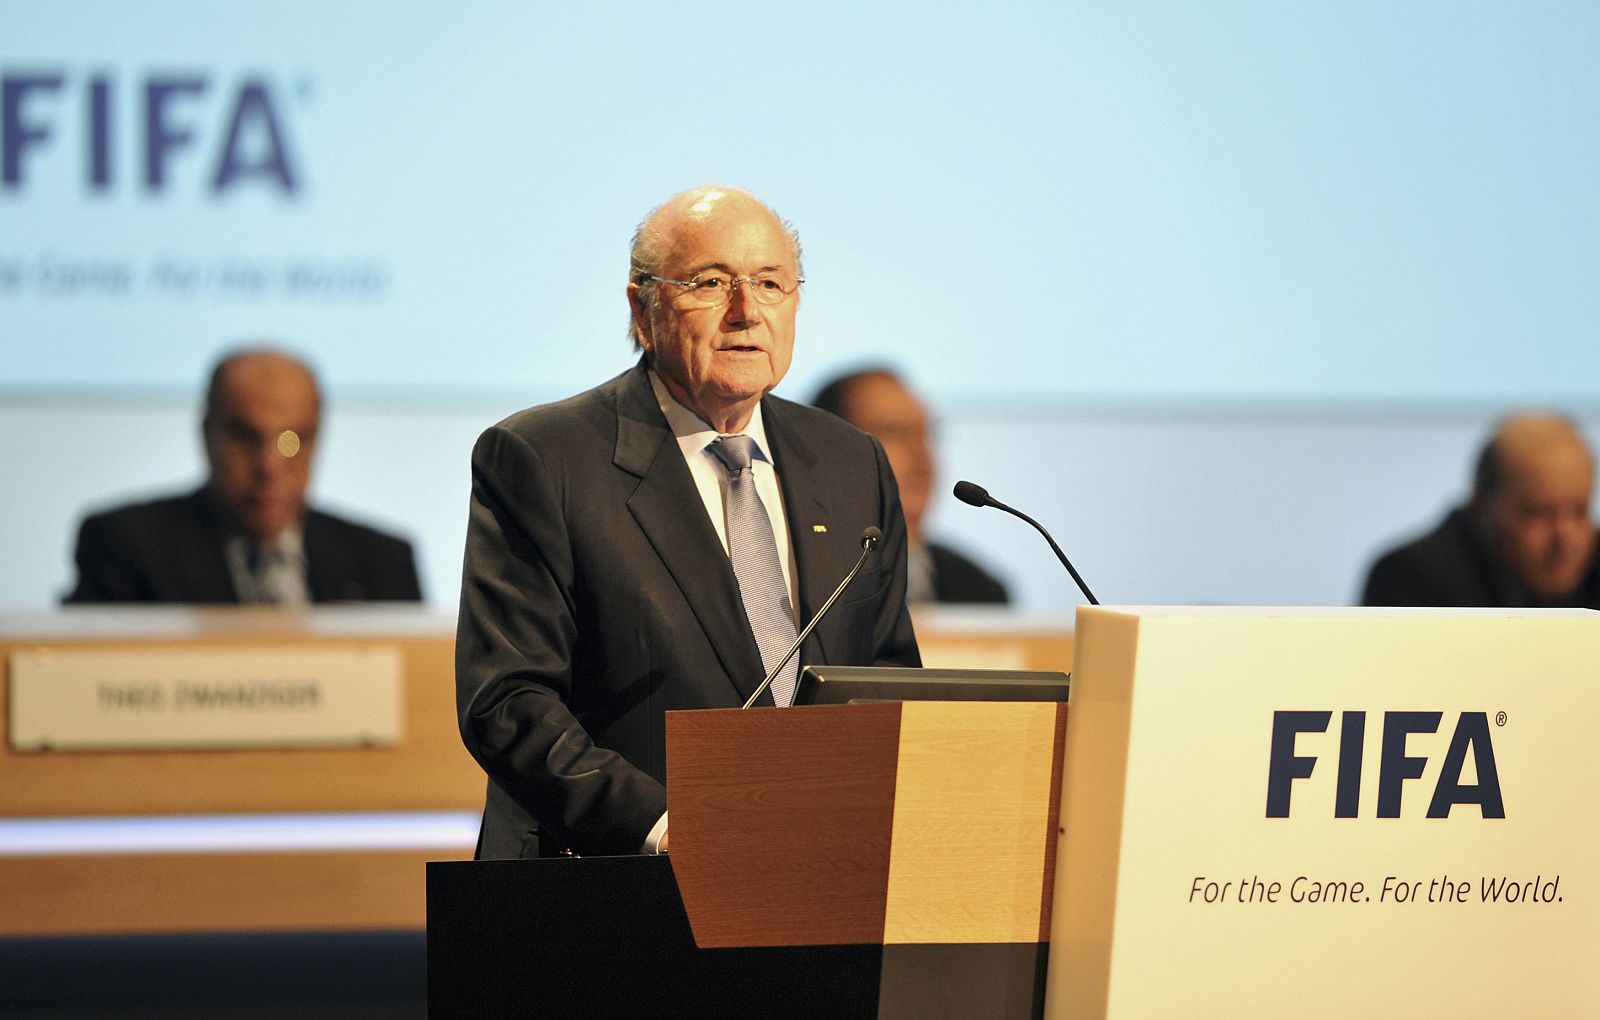 FIFA President Sepp Blatter delivers a speech during the 62nd FIFA Congress in Budapest